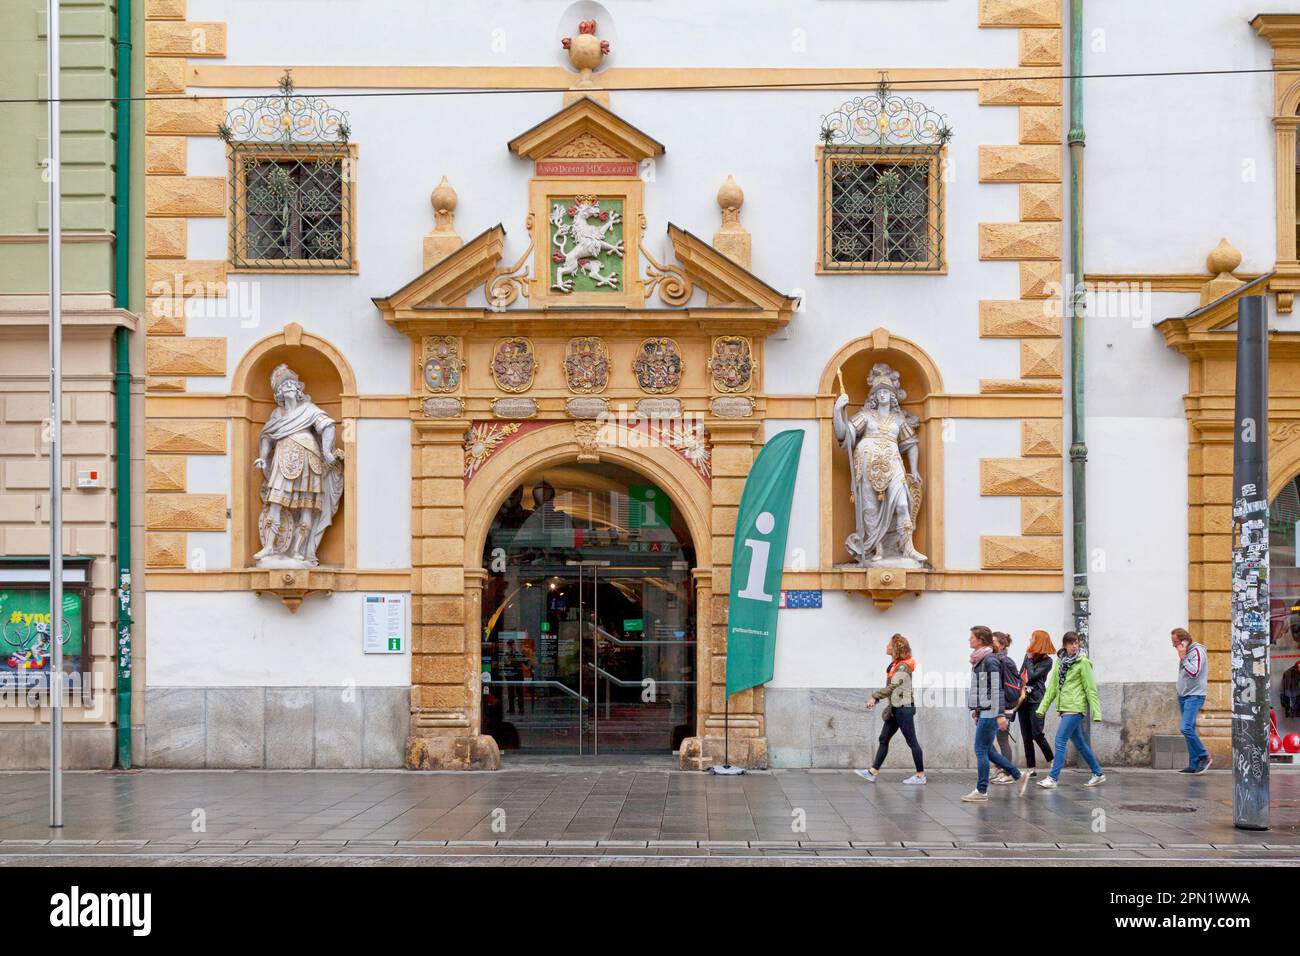 Graz, Austria - May 28 2019: Entrance of the Styrian Armoury (German: Landeszeughaus), the world's largest historic armoury holding approximately 32,0 Stock Photo